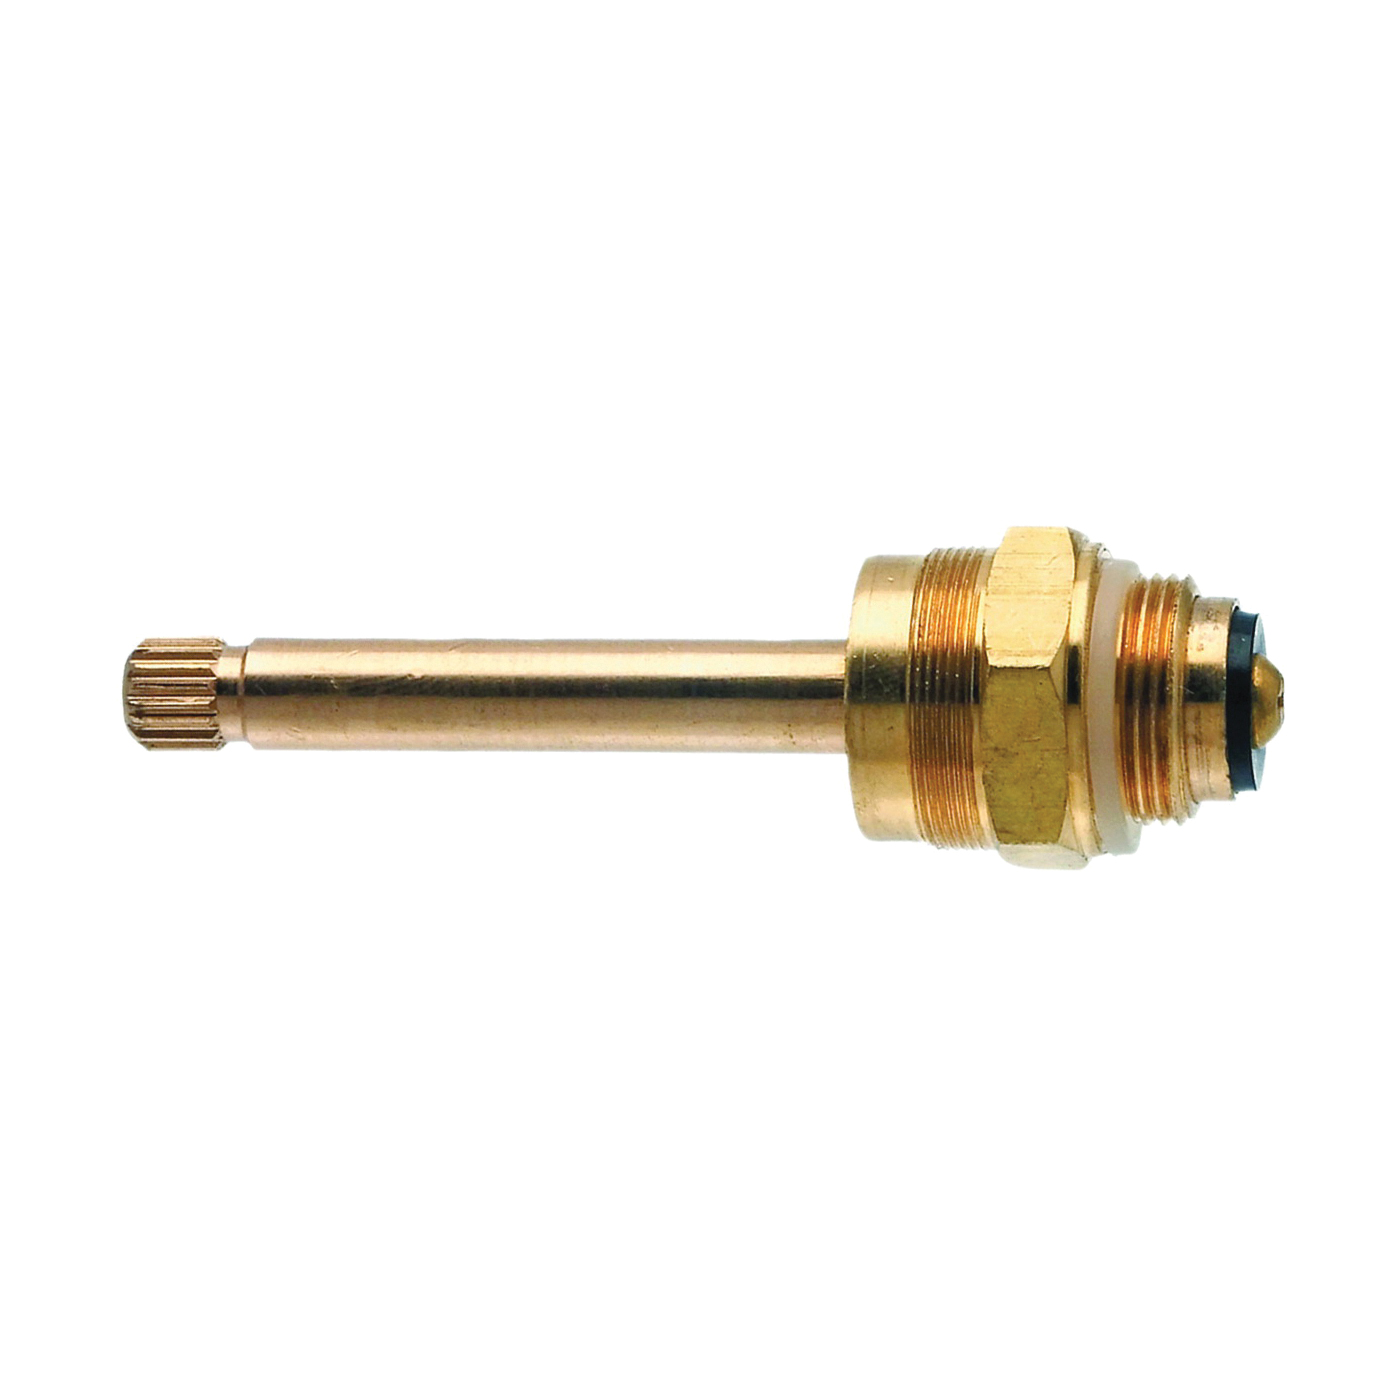 15525B Faucet Stem, Brass, 3-21/32 in L, For: Indiana Brass Two Handle Bath Faucets